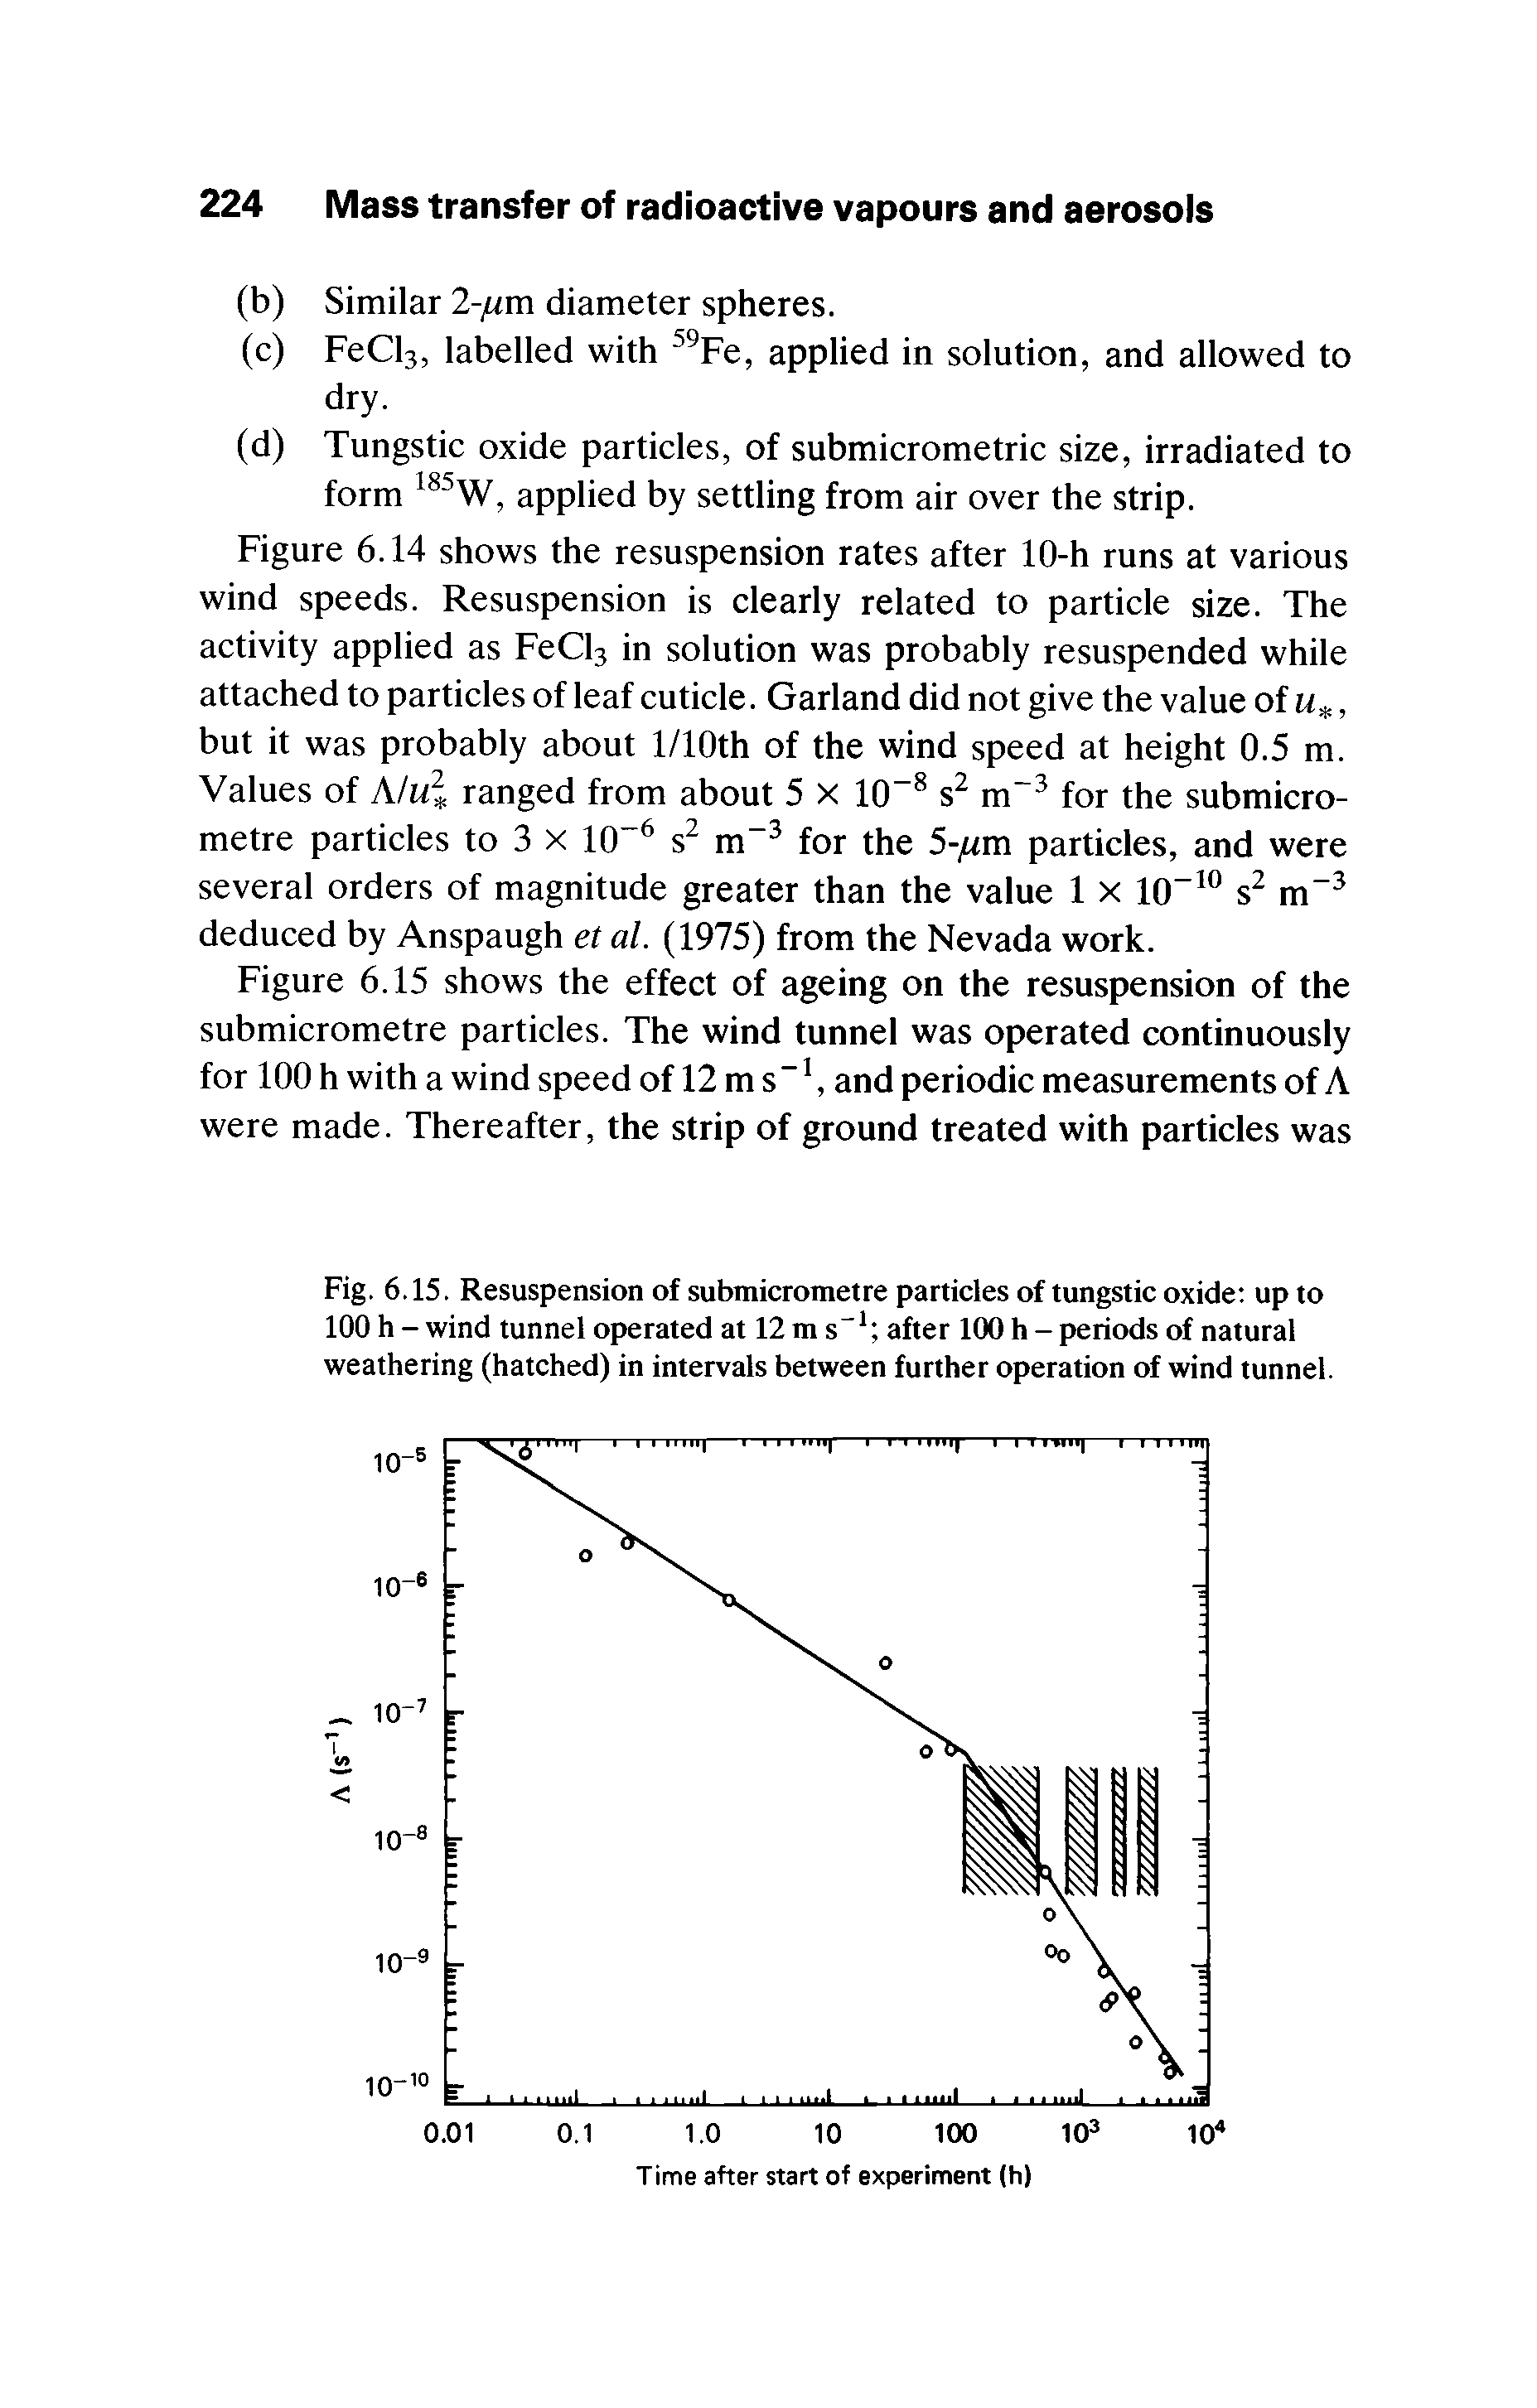 Fig. 6.15. Resuspension of submicrometre particles of tungstic oxide up to 100 h - wind tunnel operated at 12 m s-1 after 100 h - periods of natural weathering (hatched) in intervals between further operation of wind tunnel.